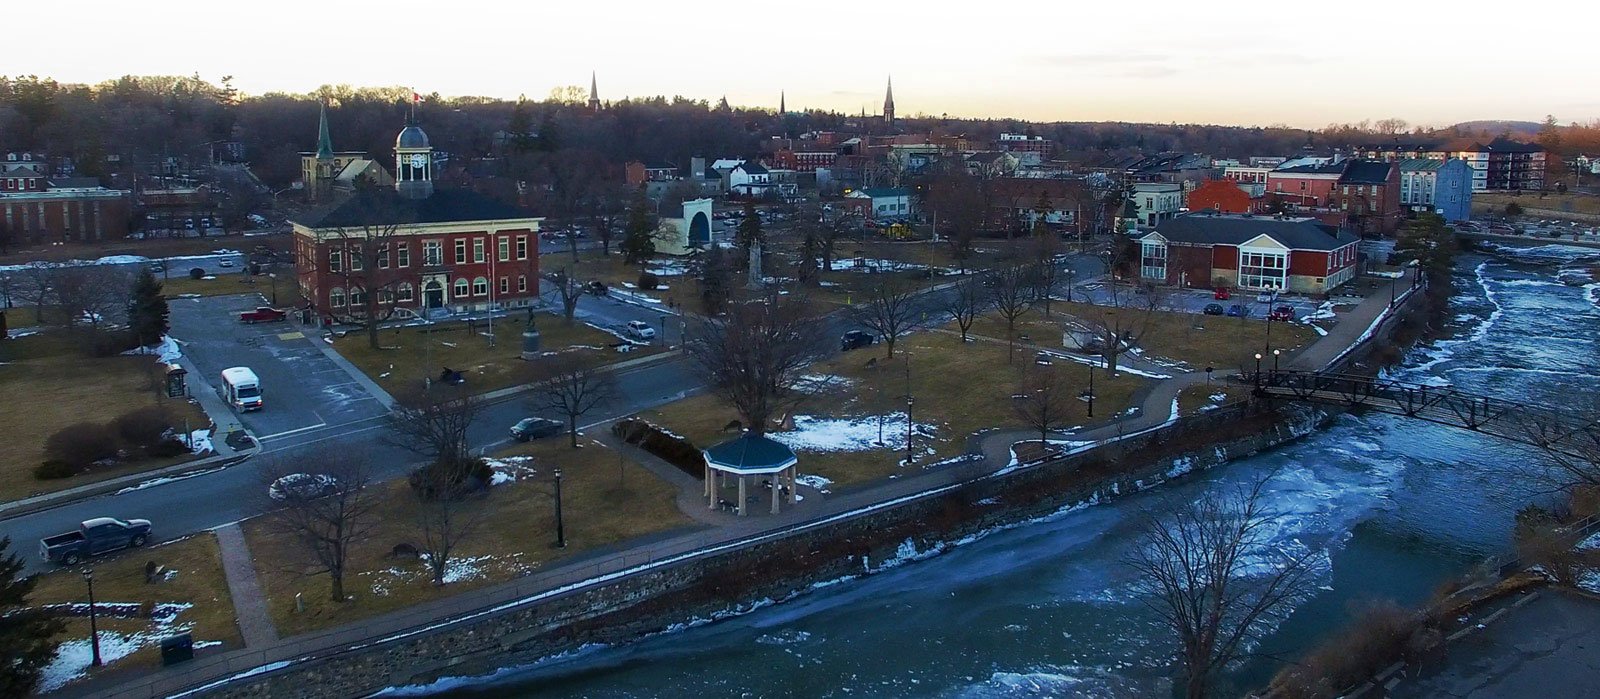 Aerial photo of Port Hope in the winter